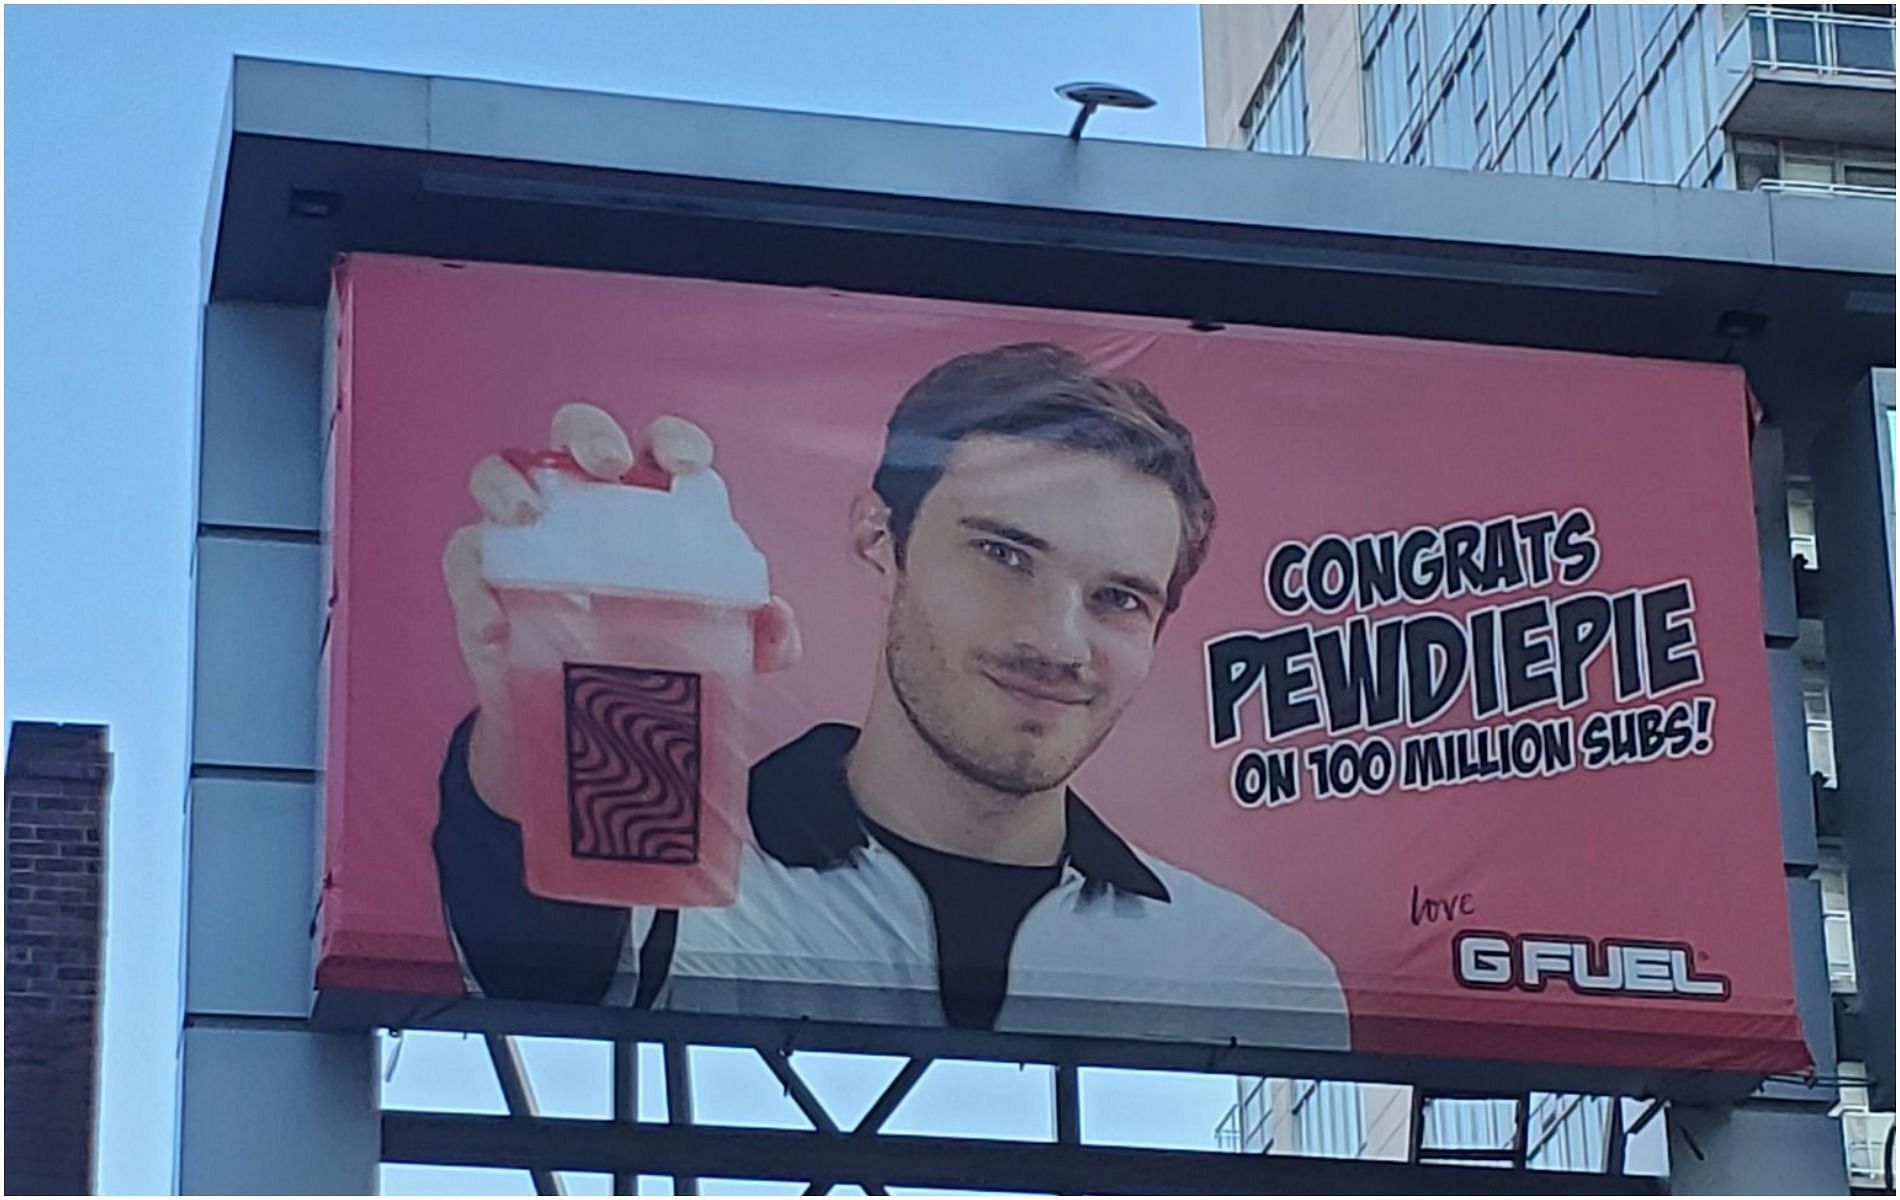 Pewdiepie hit 100 million subs three years ago, but it still haunts this Twitter user (Image fogiibear/Twitter)